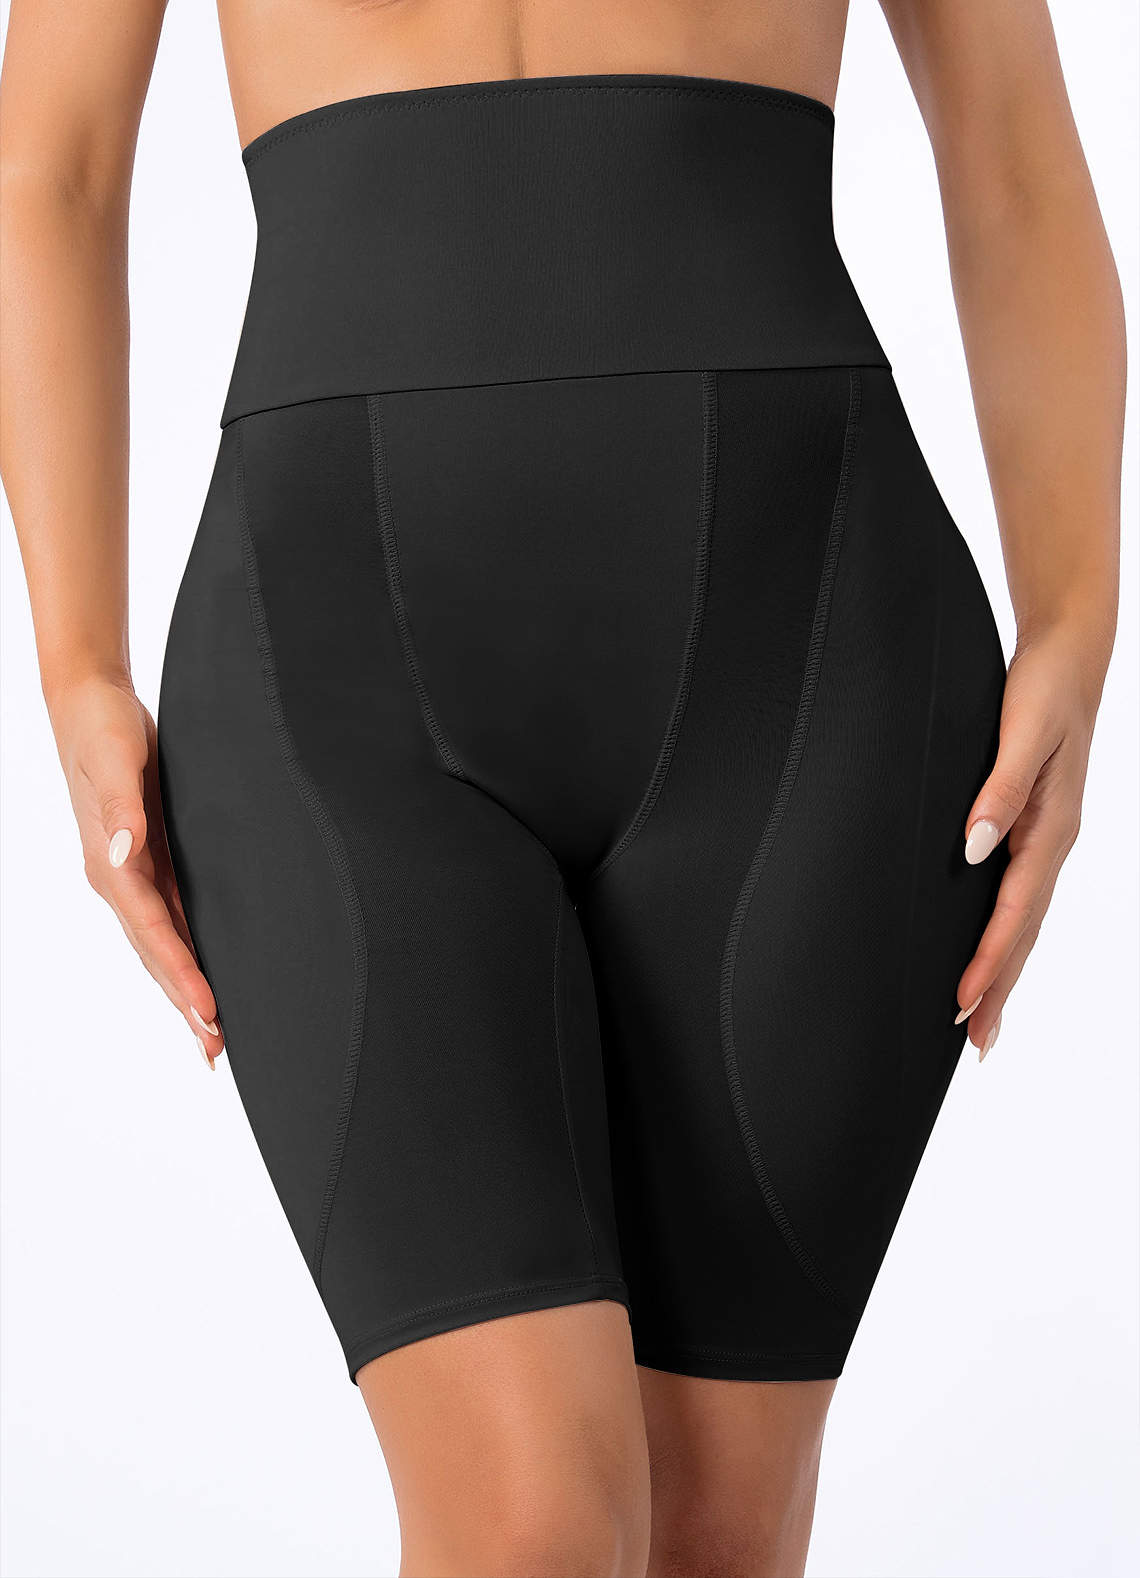 Sexy Seamless Hip Enhancer Shapewear Dress With Padded Hip Enhancer And  Push Up Bil Pants For Women L220802 From Sihuai10, $14.62